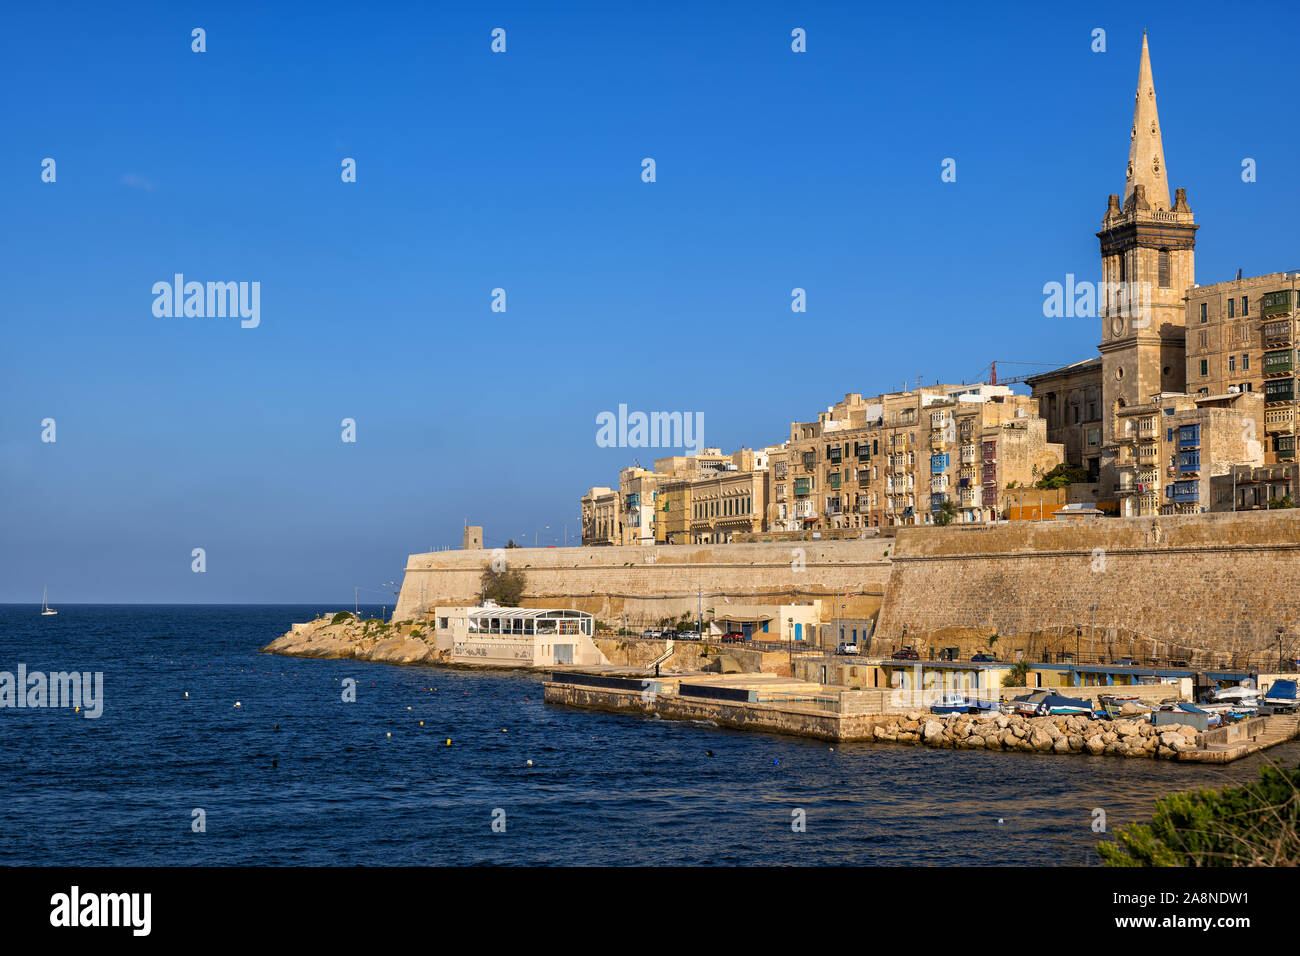 Walled old city of Valletta, capital of Malta, an island country on the Mediterranean Sea. Stock Photo